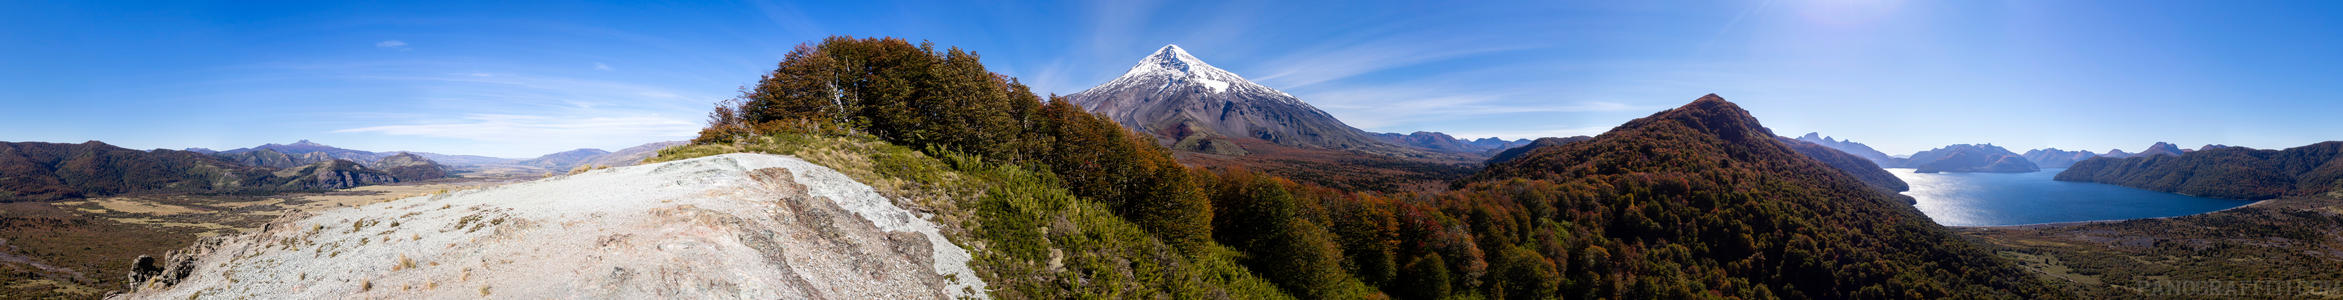 Volcano Lanin in 360 from Lago Tromen Lookout - An immersive view of the autumn forest surrounding a lookout point for volcano Lanin